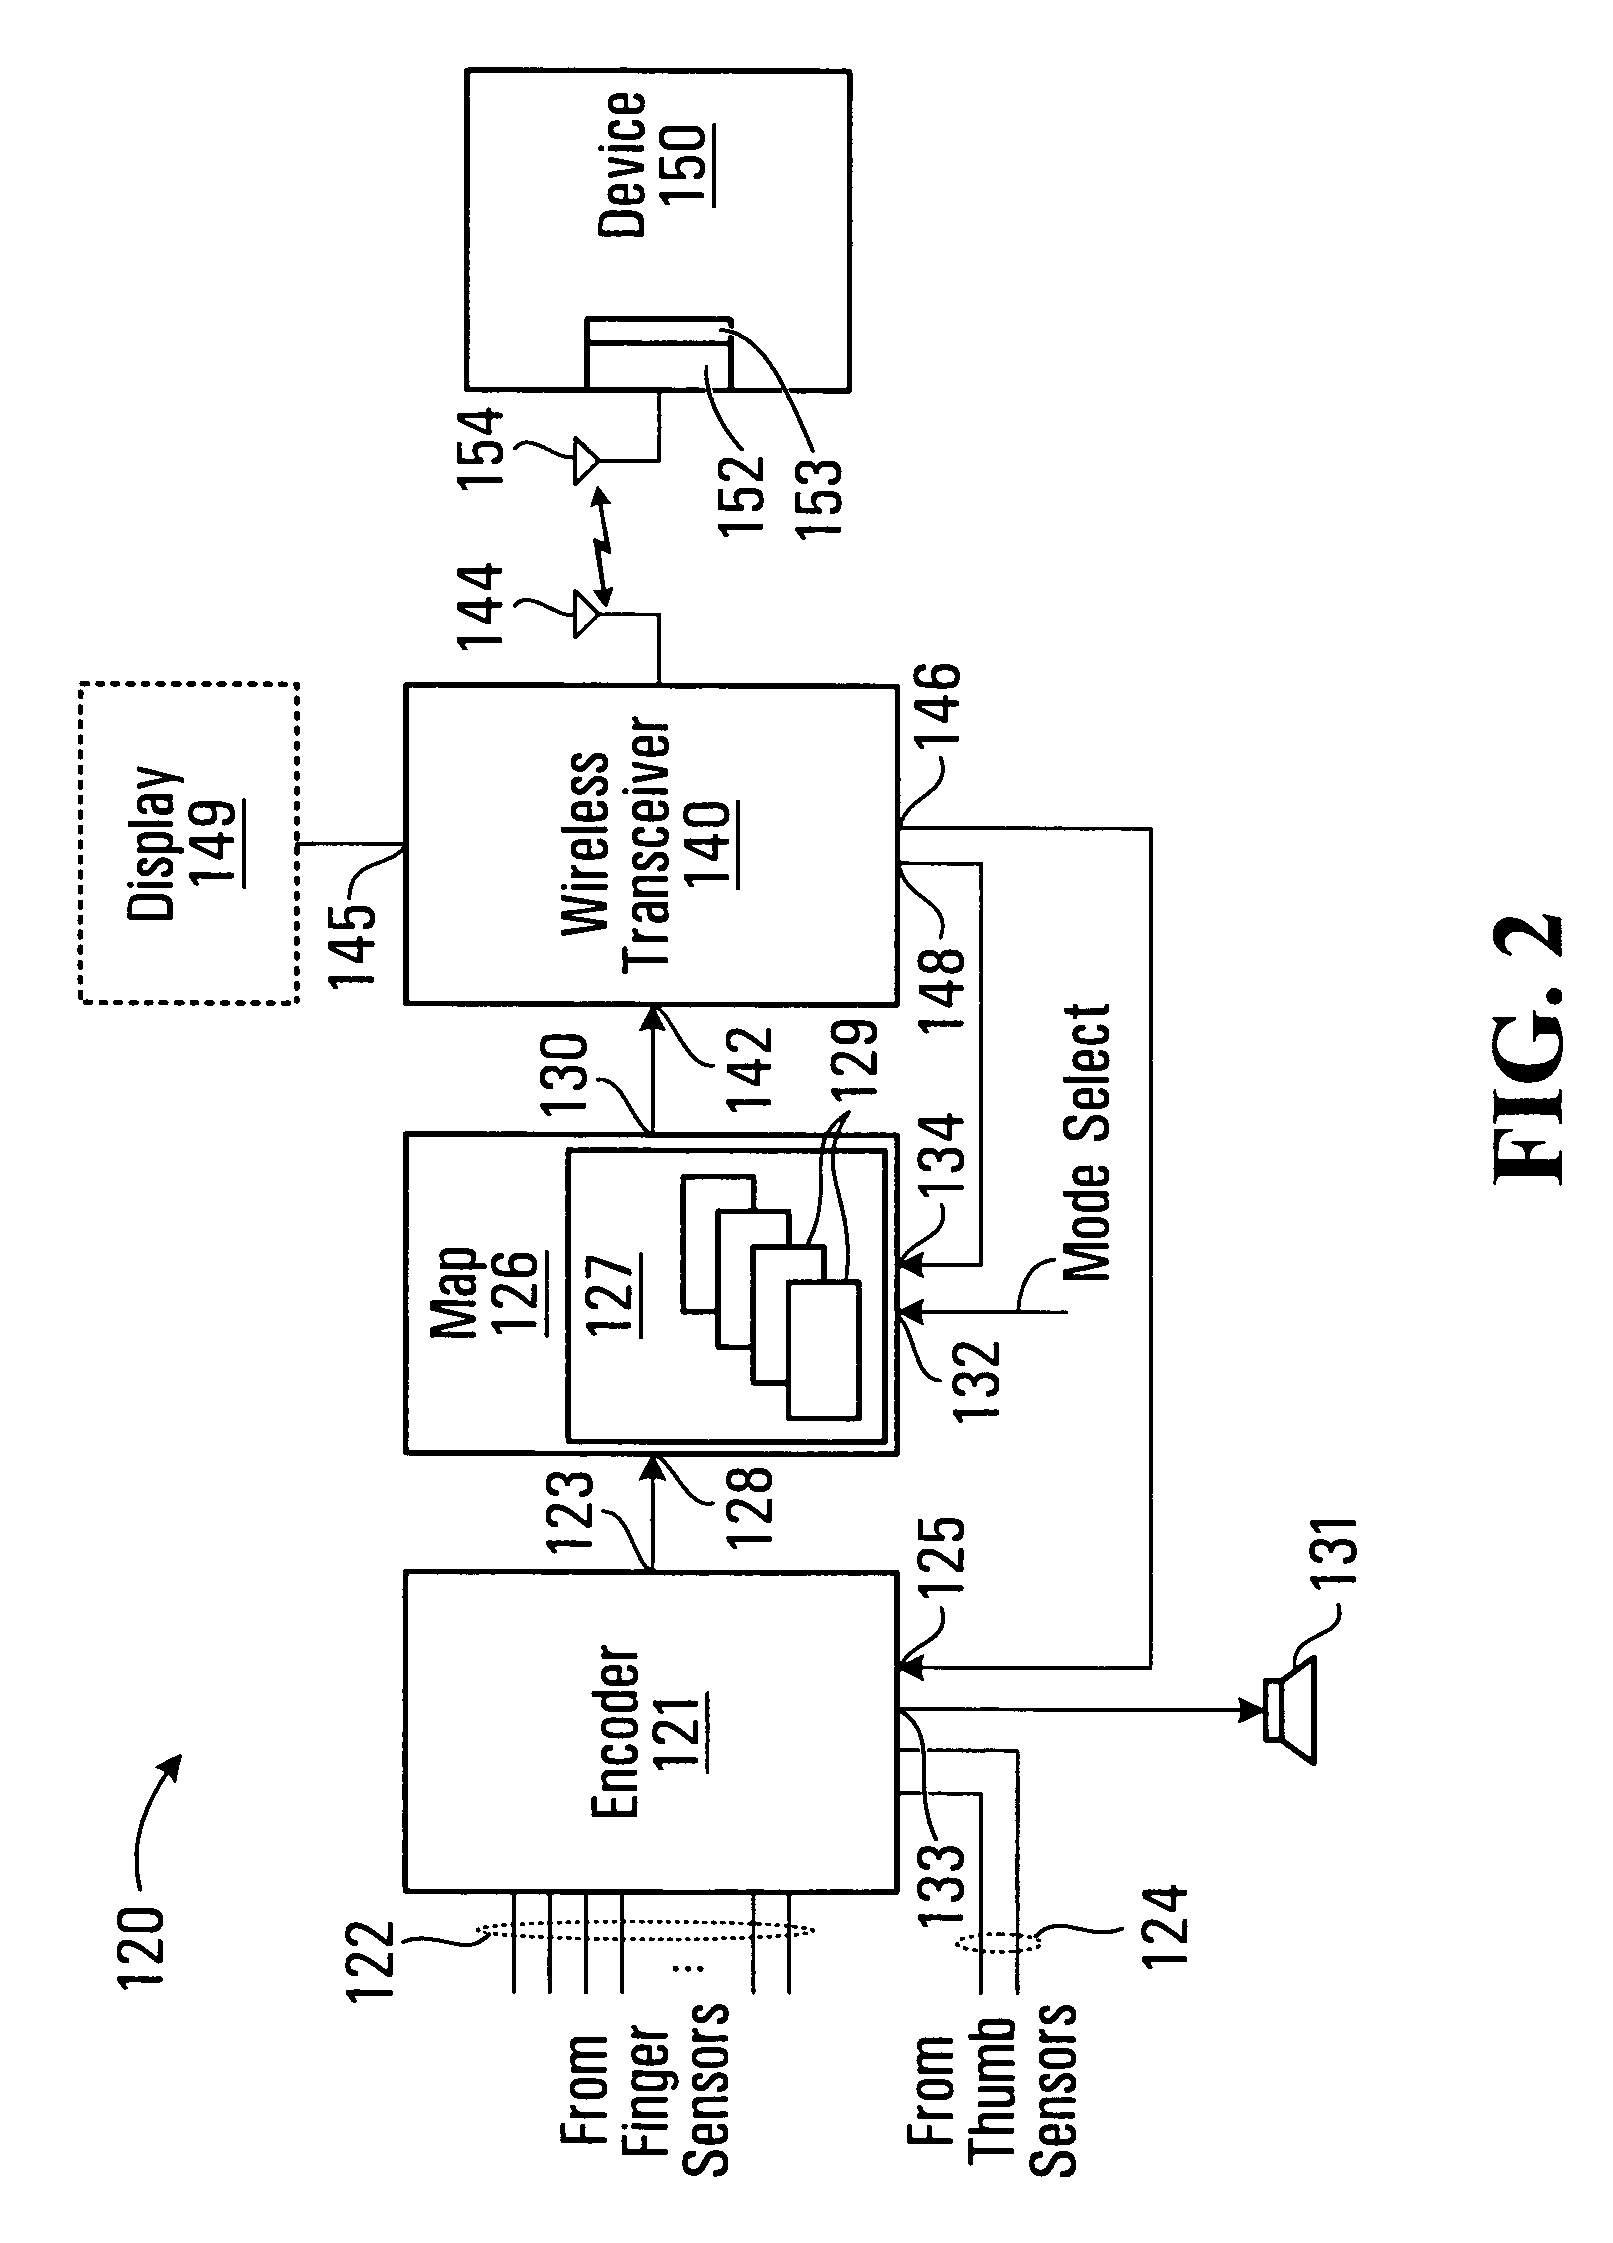 Apparatus and method for inputting information